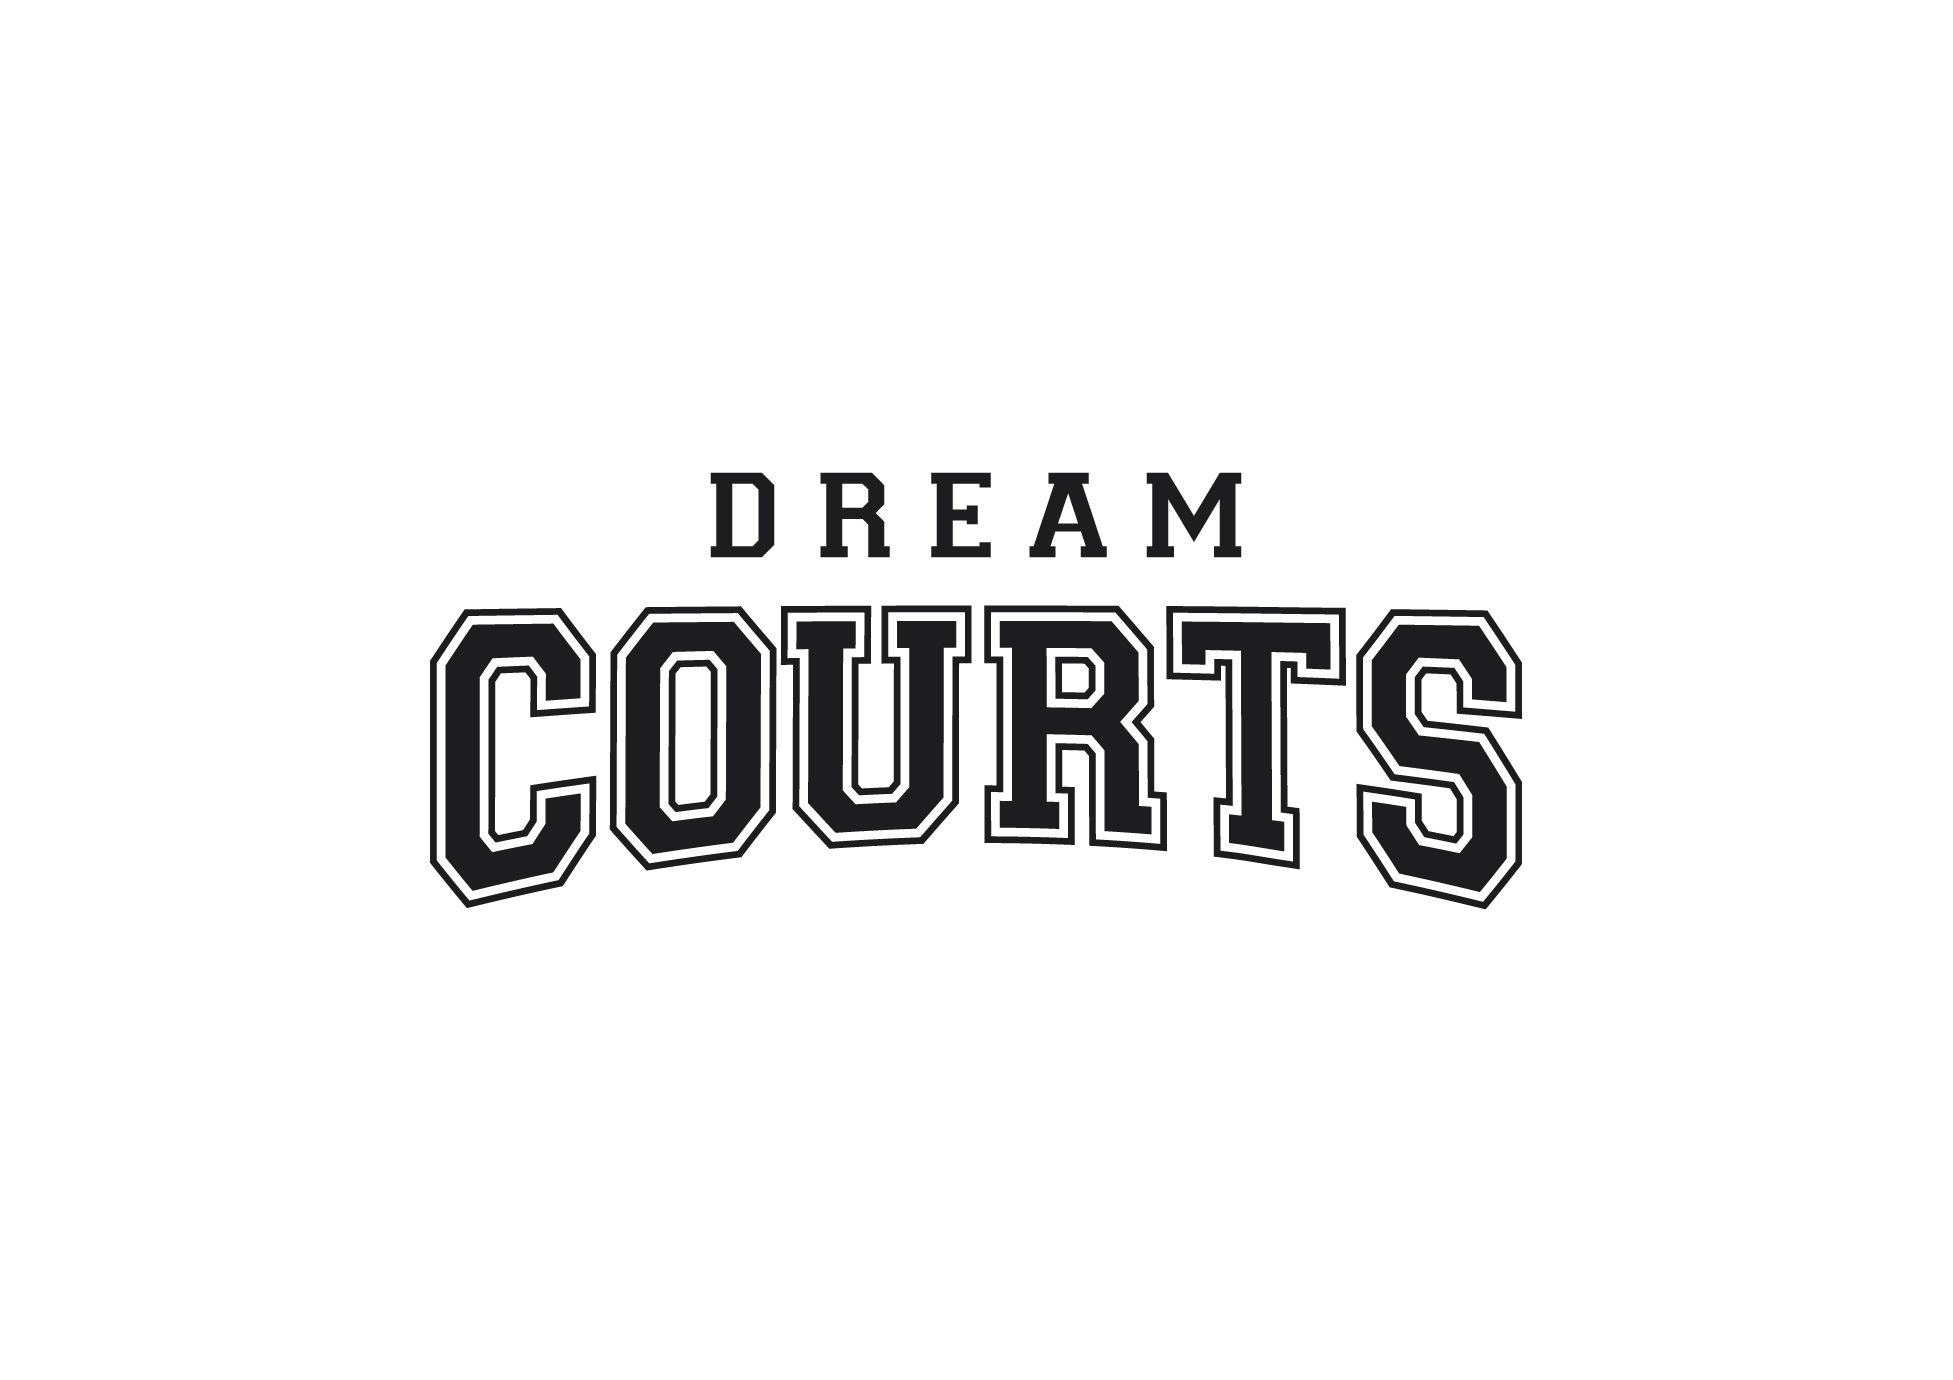 DreamCourts